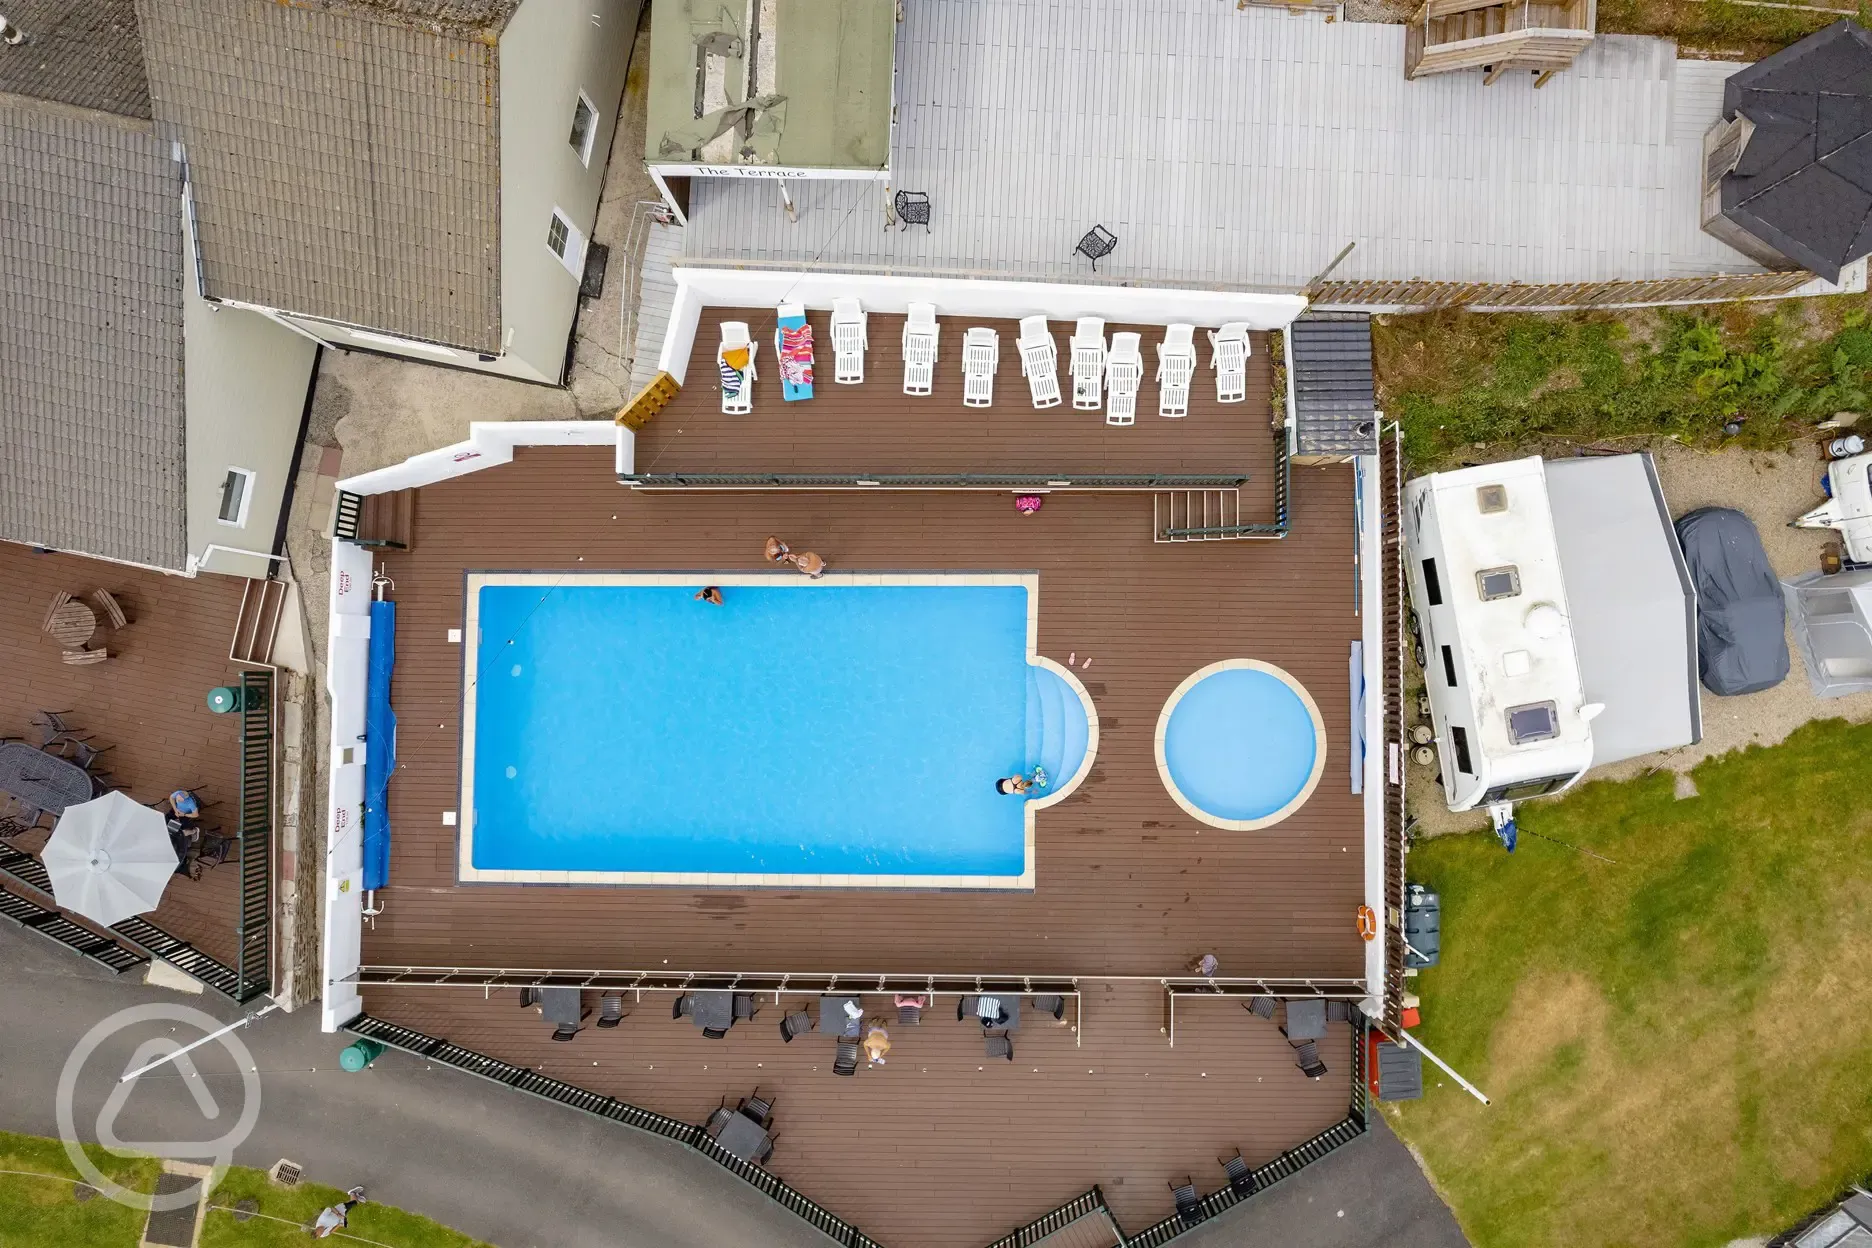 Birdseye view of the swimming pool